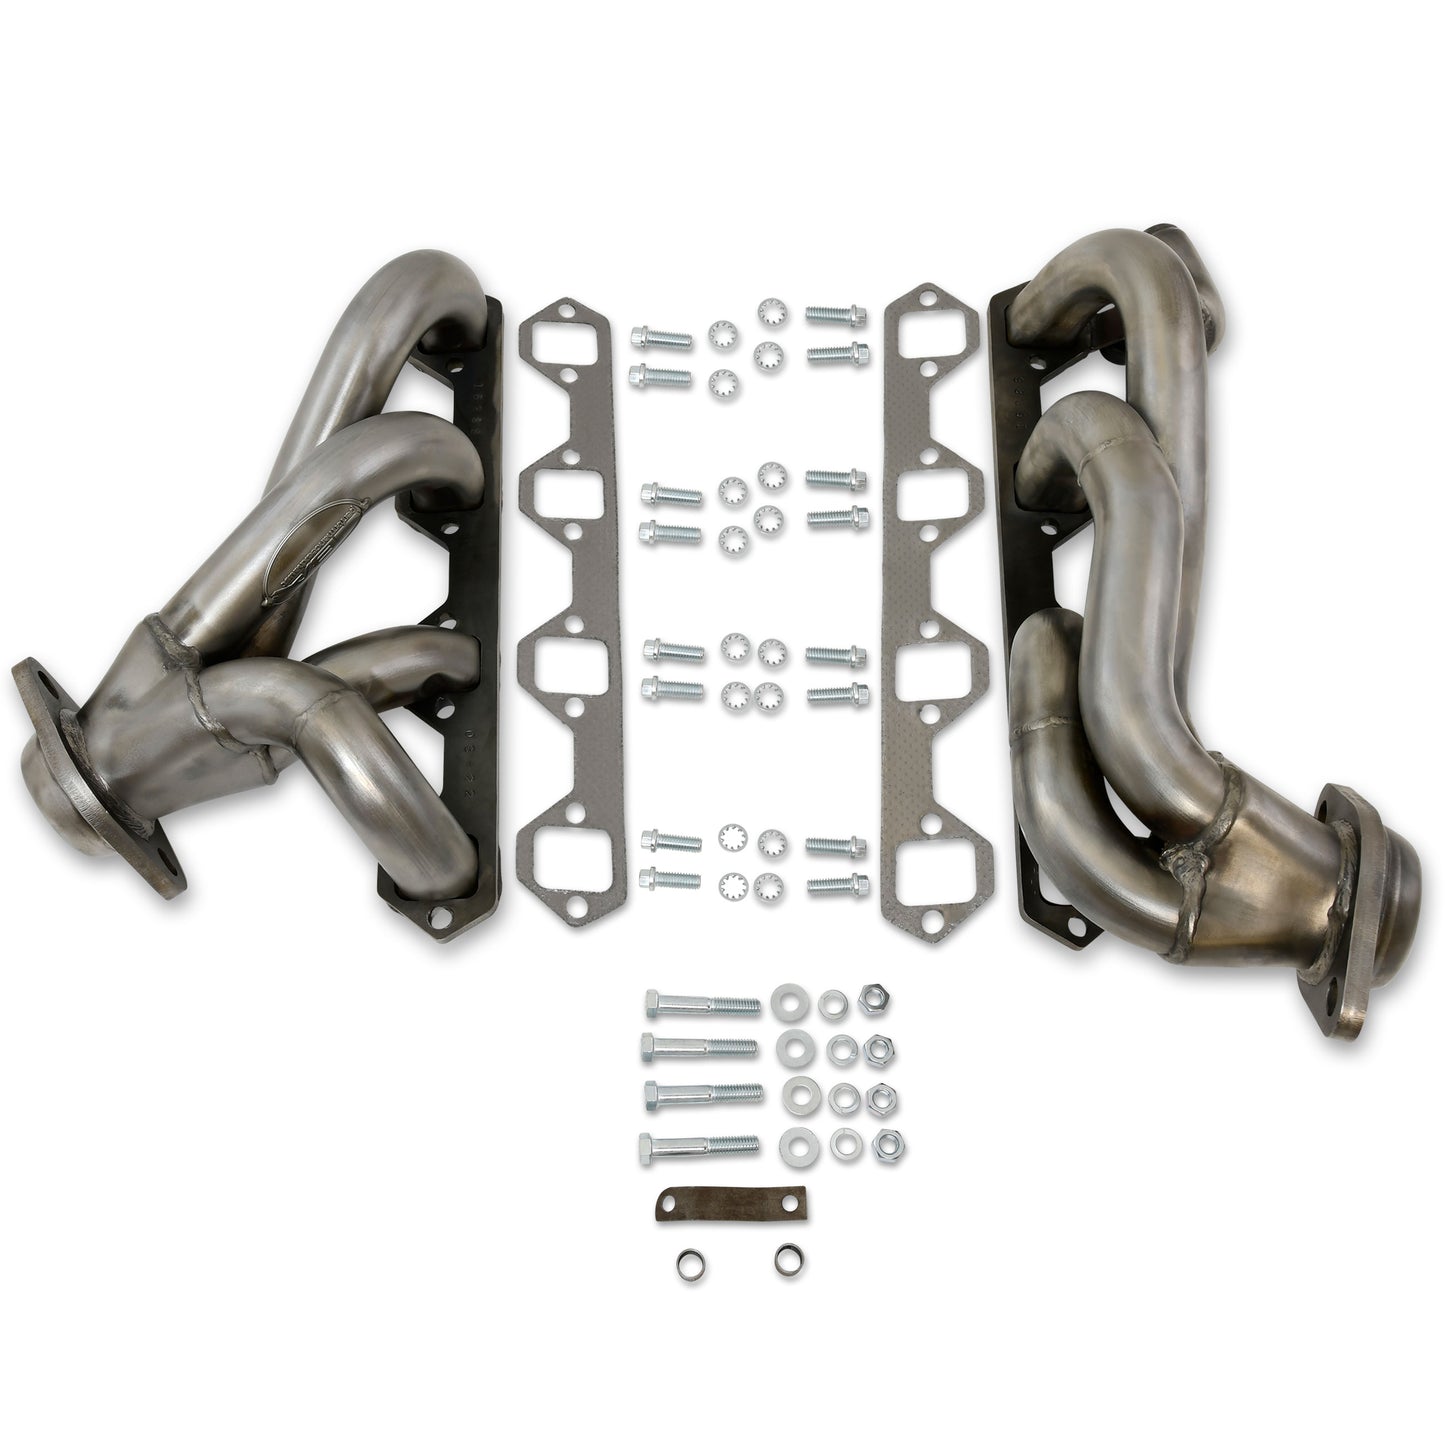 JBA Performance Exhaust 1628S 1 5/8" Header Shorty Stainless Steel 86-96 Ford Truck 5.8L